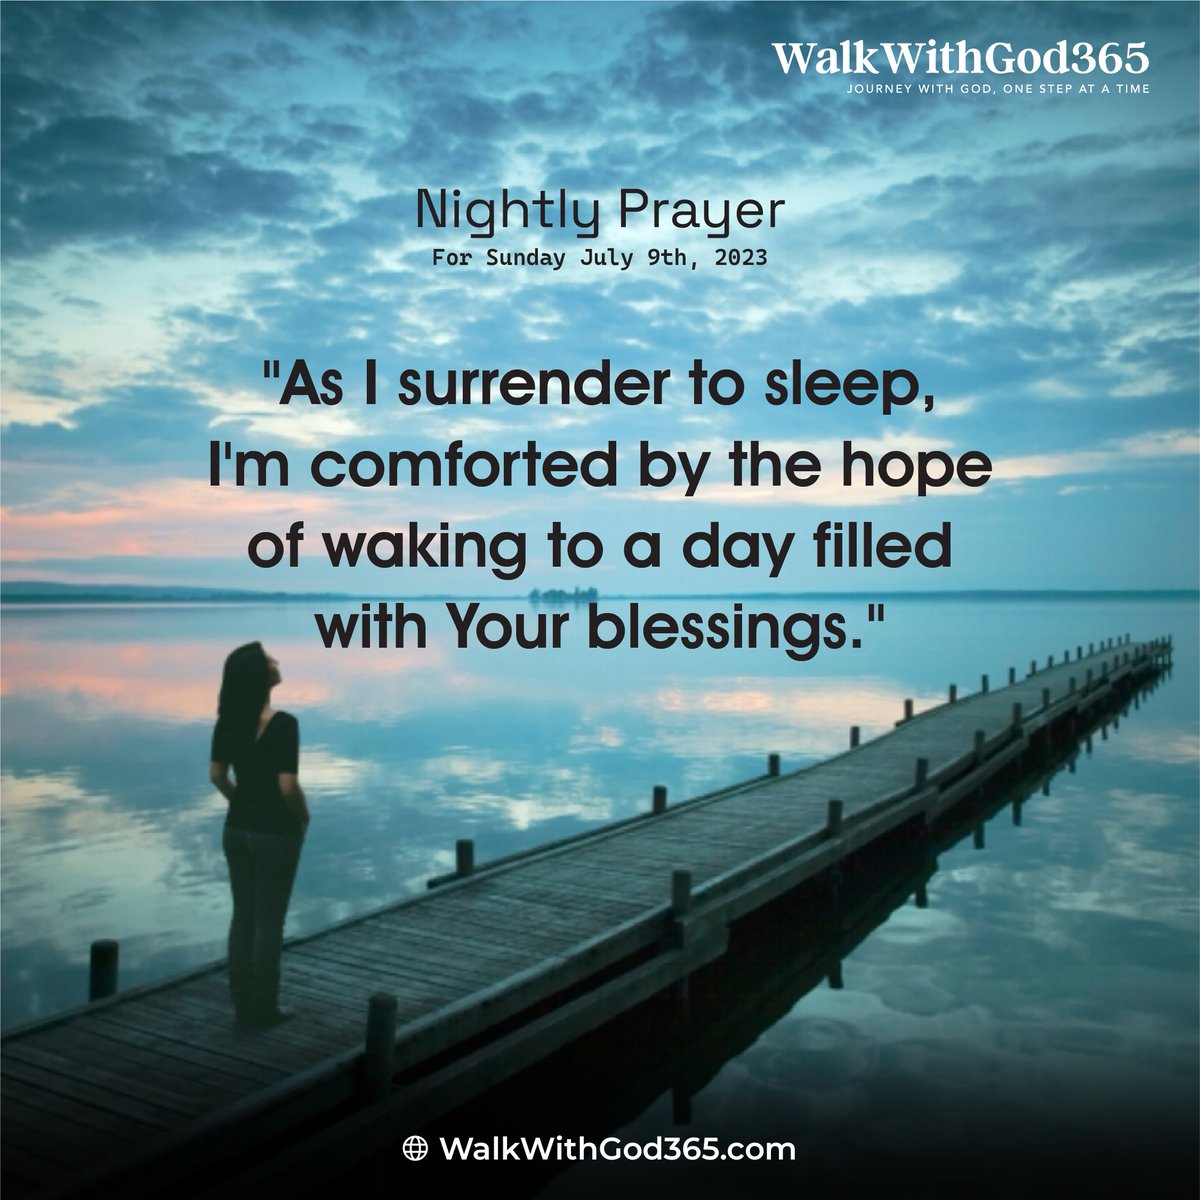 As I surrender to sleep, I'm comforted by the hope of waking to a day filled with Your blessings.'
#ScriptureMeditation #BiblicalGuidance #SweetDreams #goodnightpost #JesusChrist